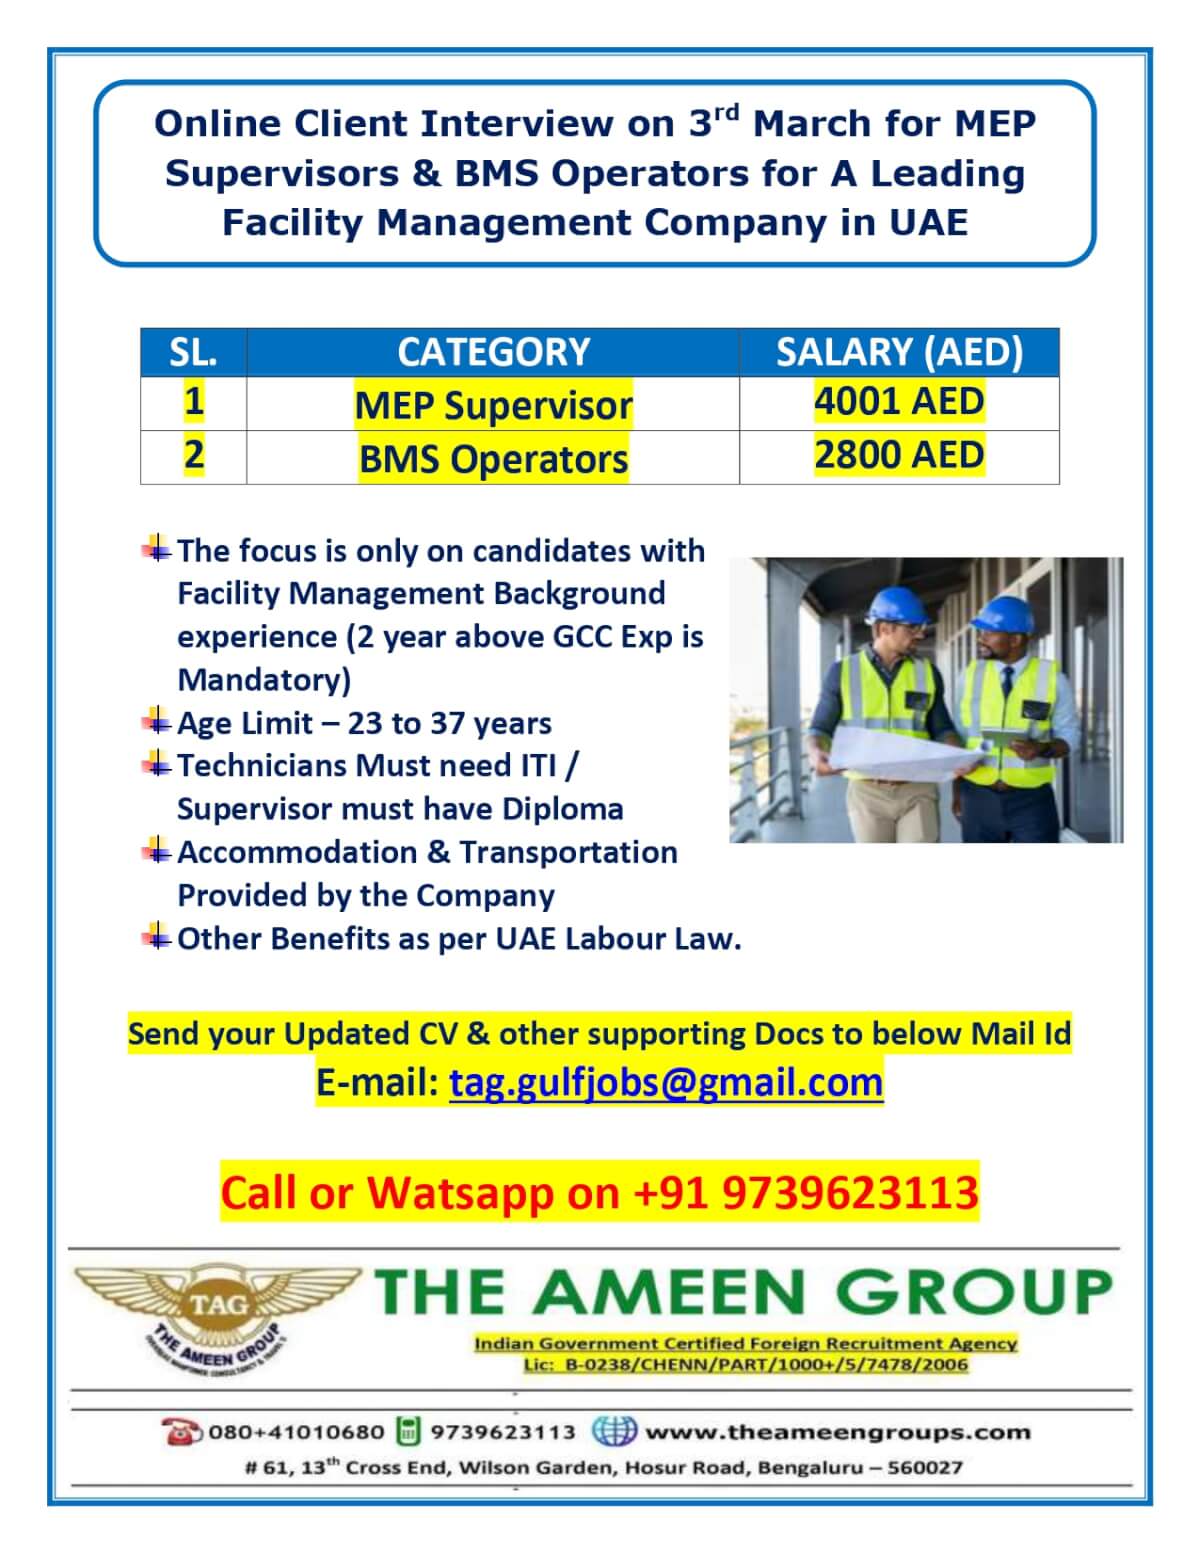 Online Client Interview on 3rd March for MEP Supervisors & BMS Operators for A Leading Facility Management Company in UAE